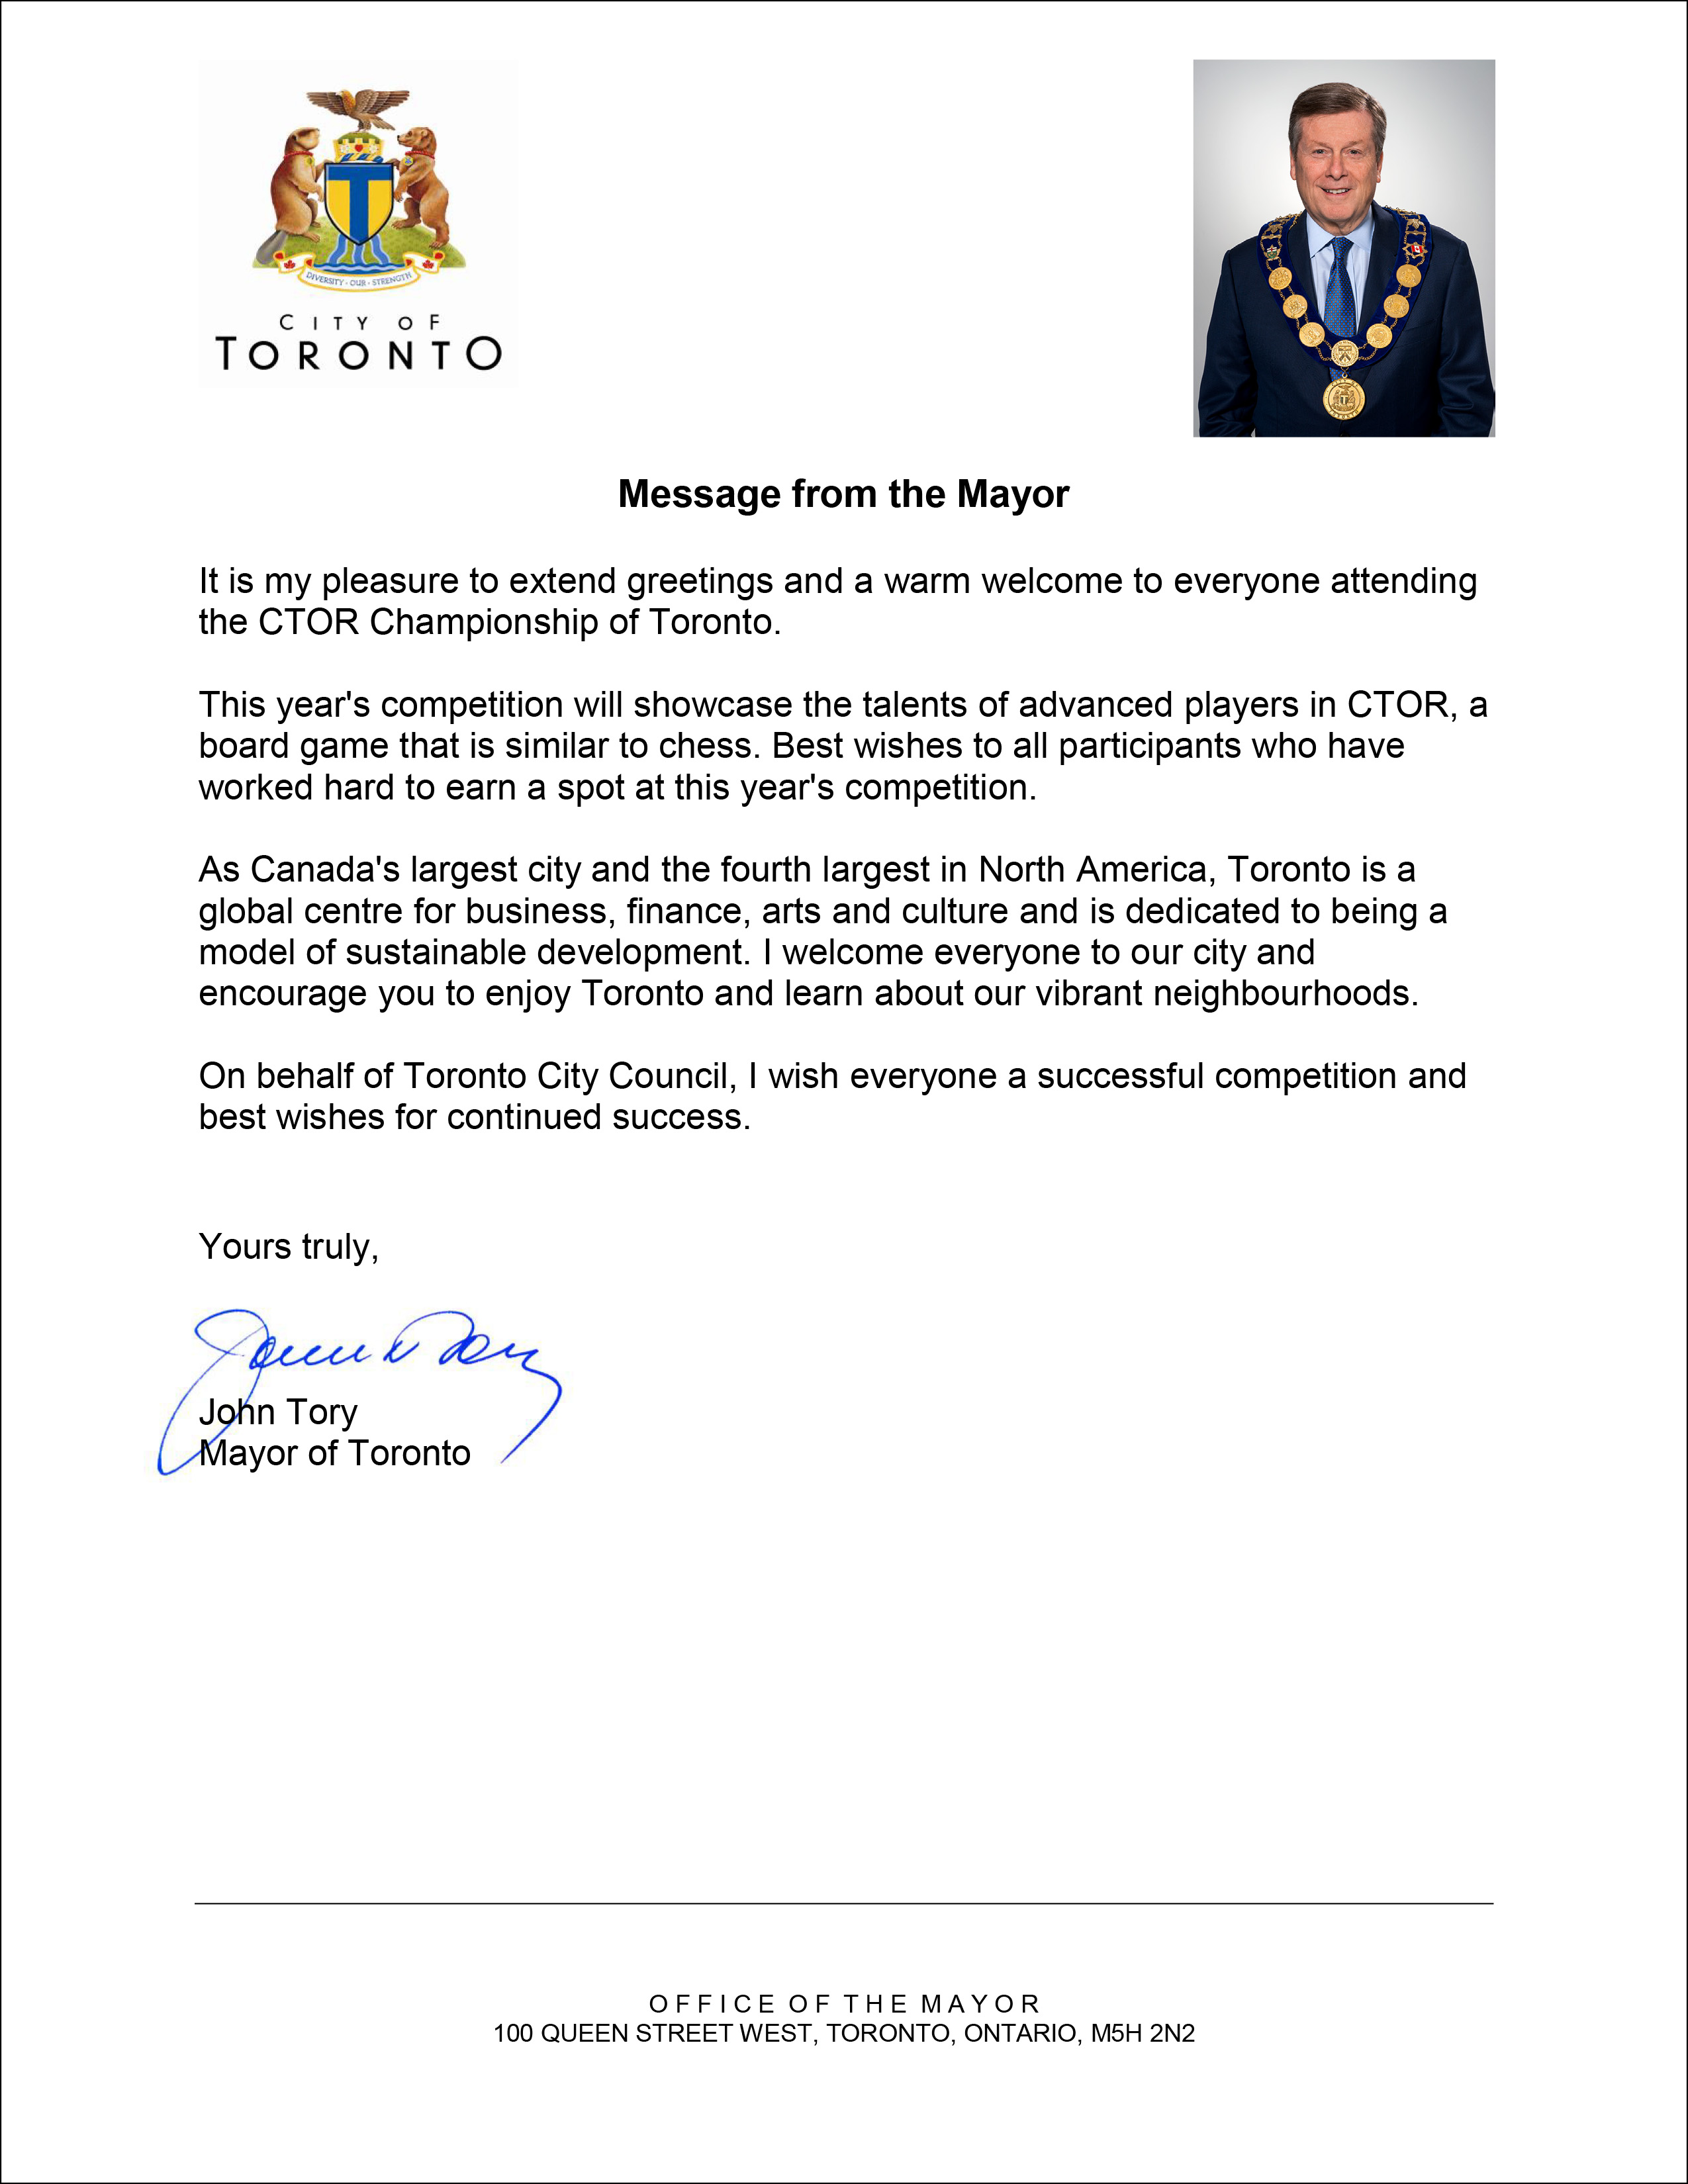 Letter of Intent from mayor of Toronto John Tory